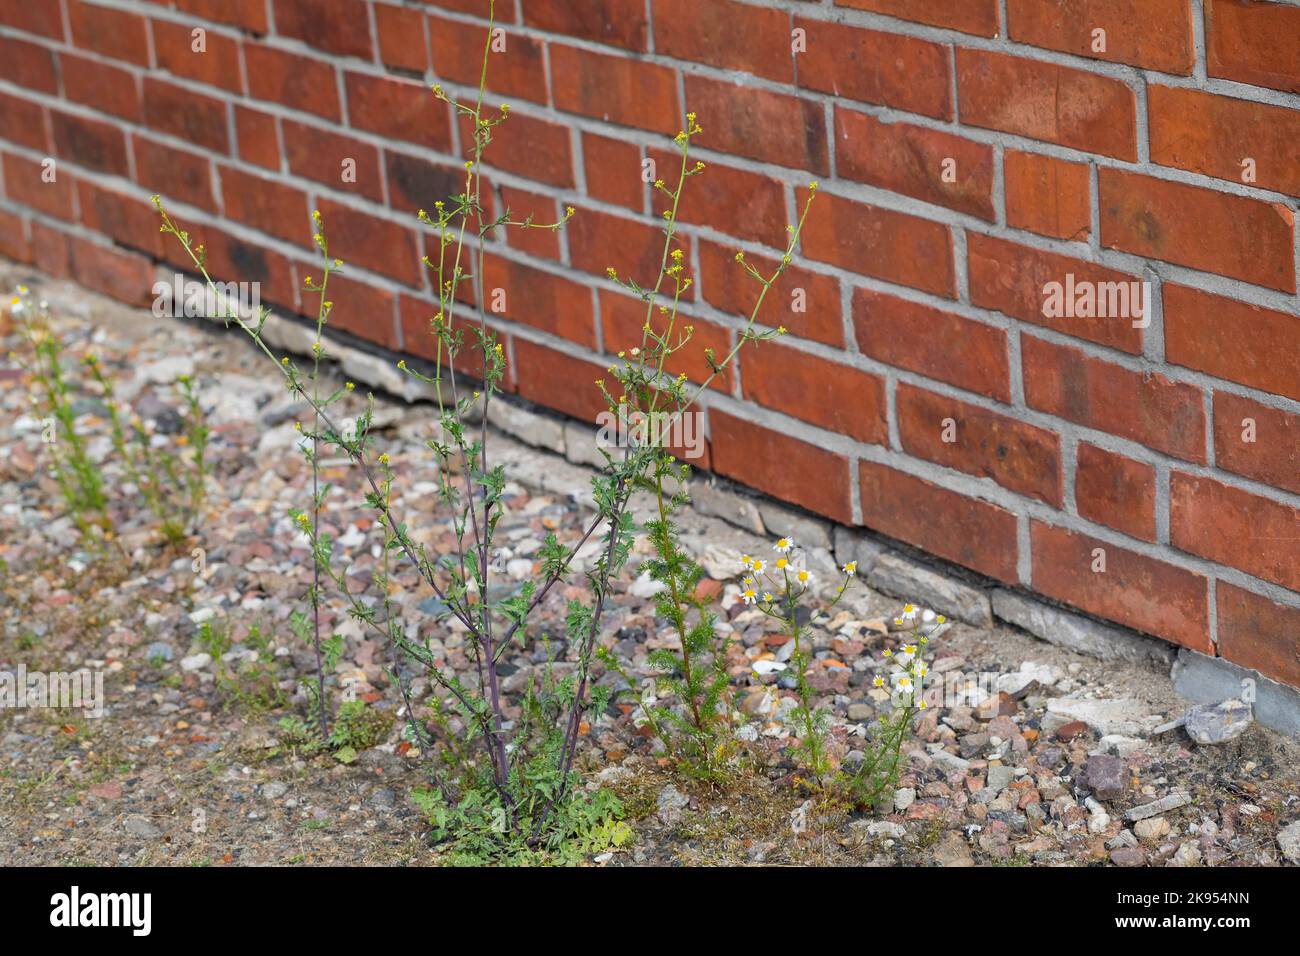 common hedge mustard, hairy-pod hedge mustard (Sisymbrium officinale), grows in gravel bed next to a wall, Germany Stock Photo